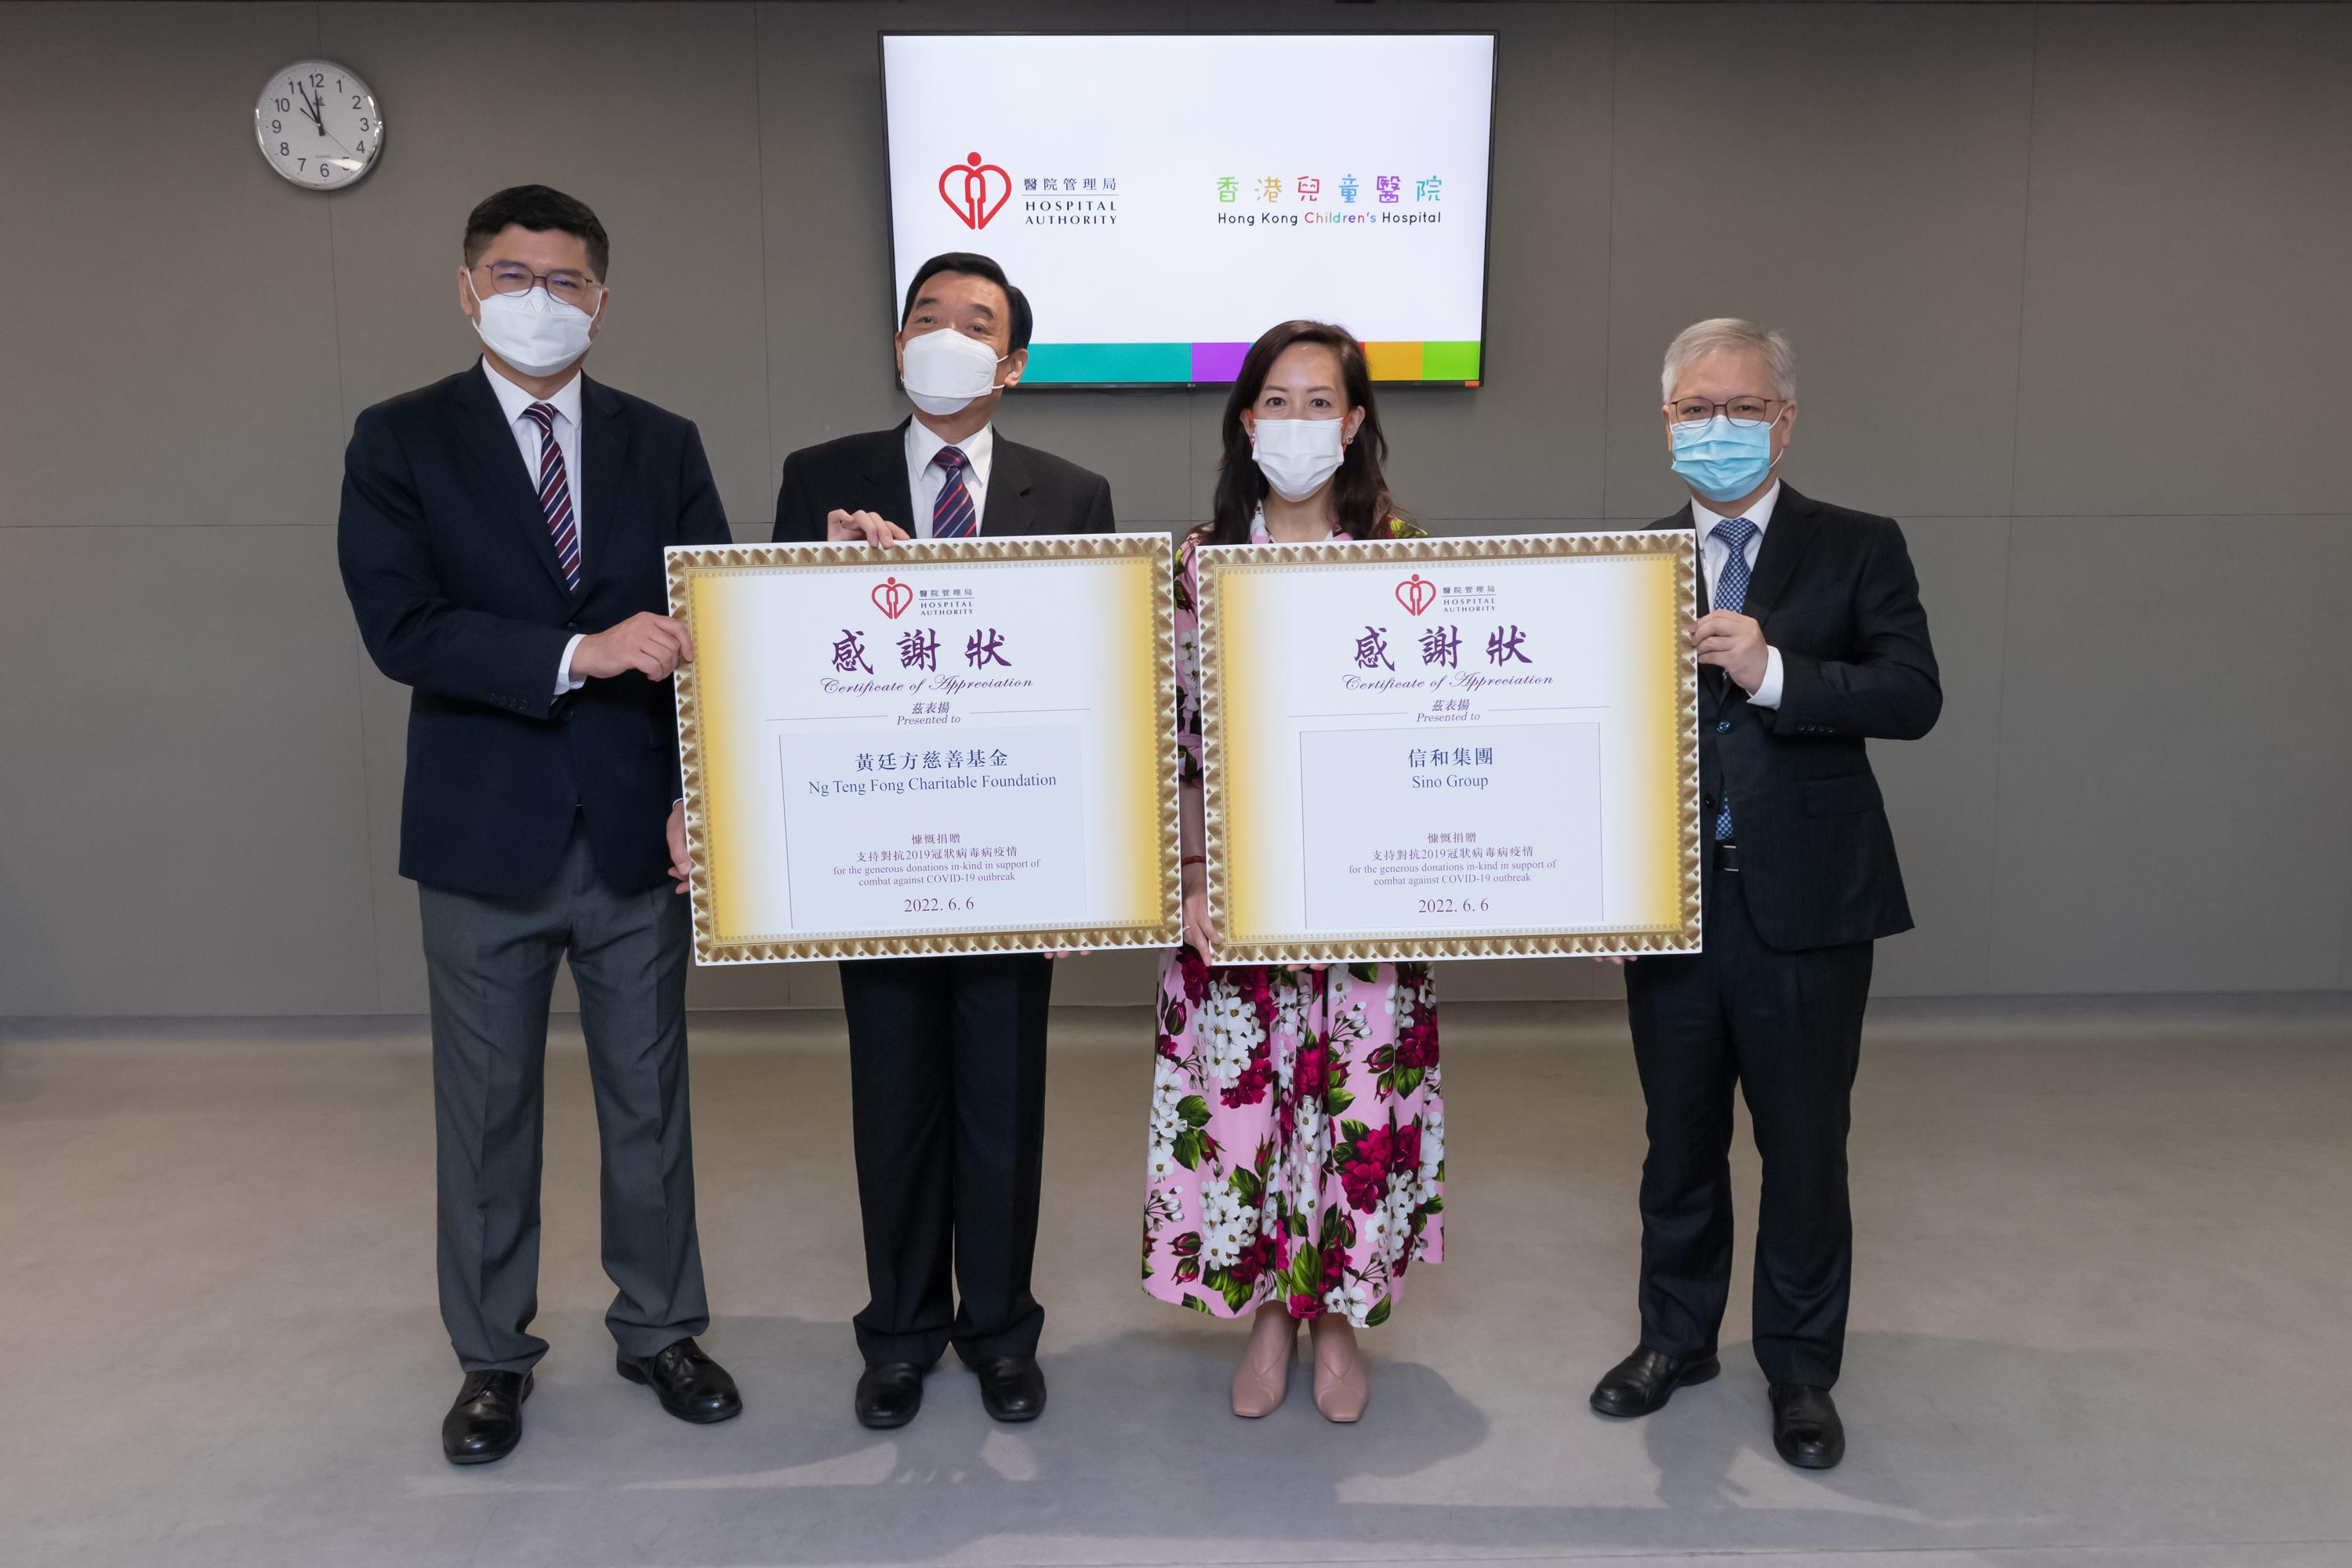 The Hospital Authority (HA) today (June 6) expressed its heartfelt appreciation to the Sino Group and the Ng Teng Fong Charitable Foundation for their continuous support to HA staff in fighting against the epidemic since 2020. Photo shows Group General Manager of Sino Group and Director of the Ng Teng Fong Charitable Foundation Ms Nikki Ng (second right); the HA Chairman, Mr Henry Fan (second left); the HA Chief Executive, Dr Tony Ko (first left); and the Hospital Chief Executive of Hong Kong Children's Hospital, Dr Lee Tsz-leung (first right), attending the presentation ceremony.